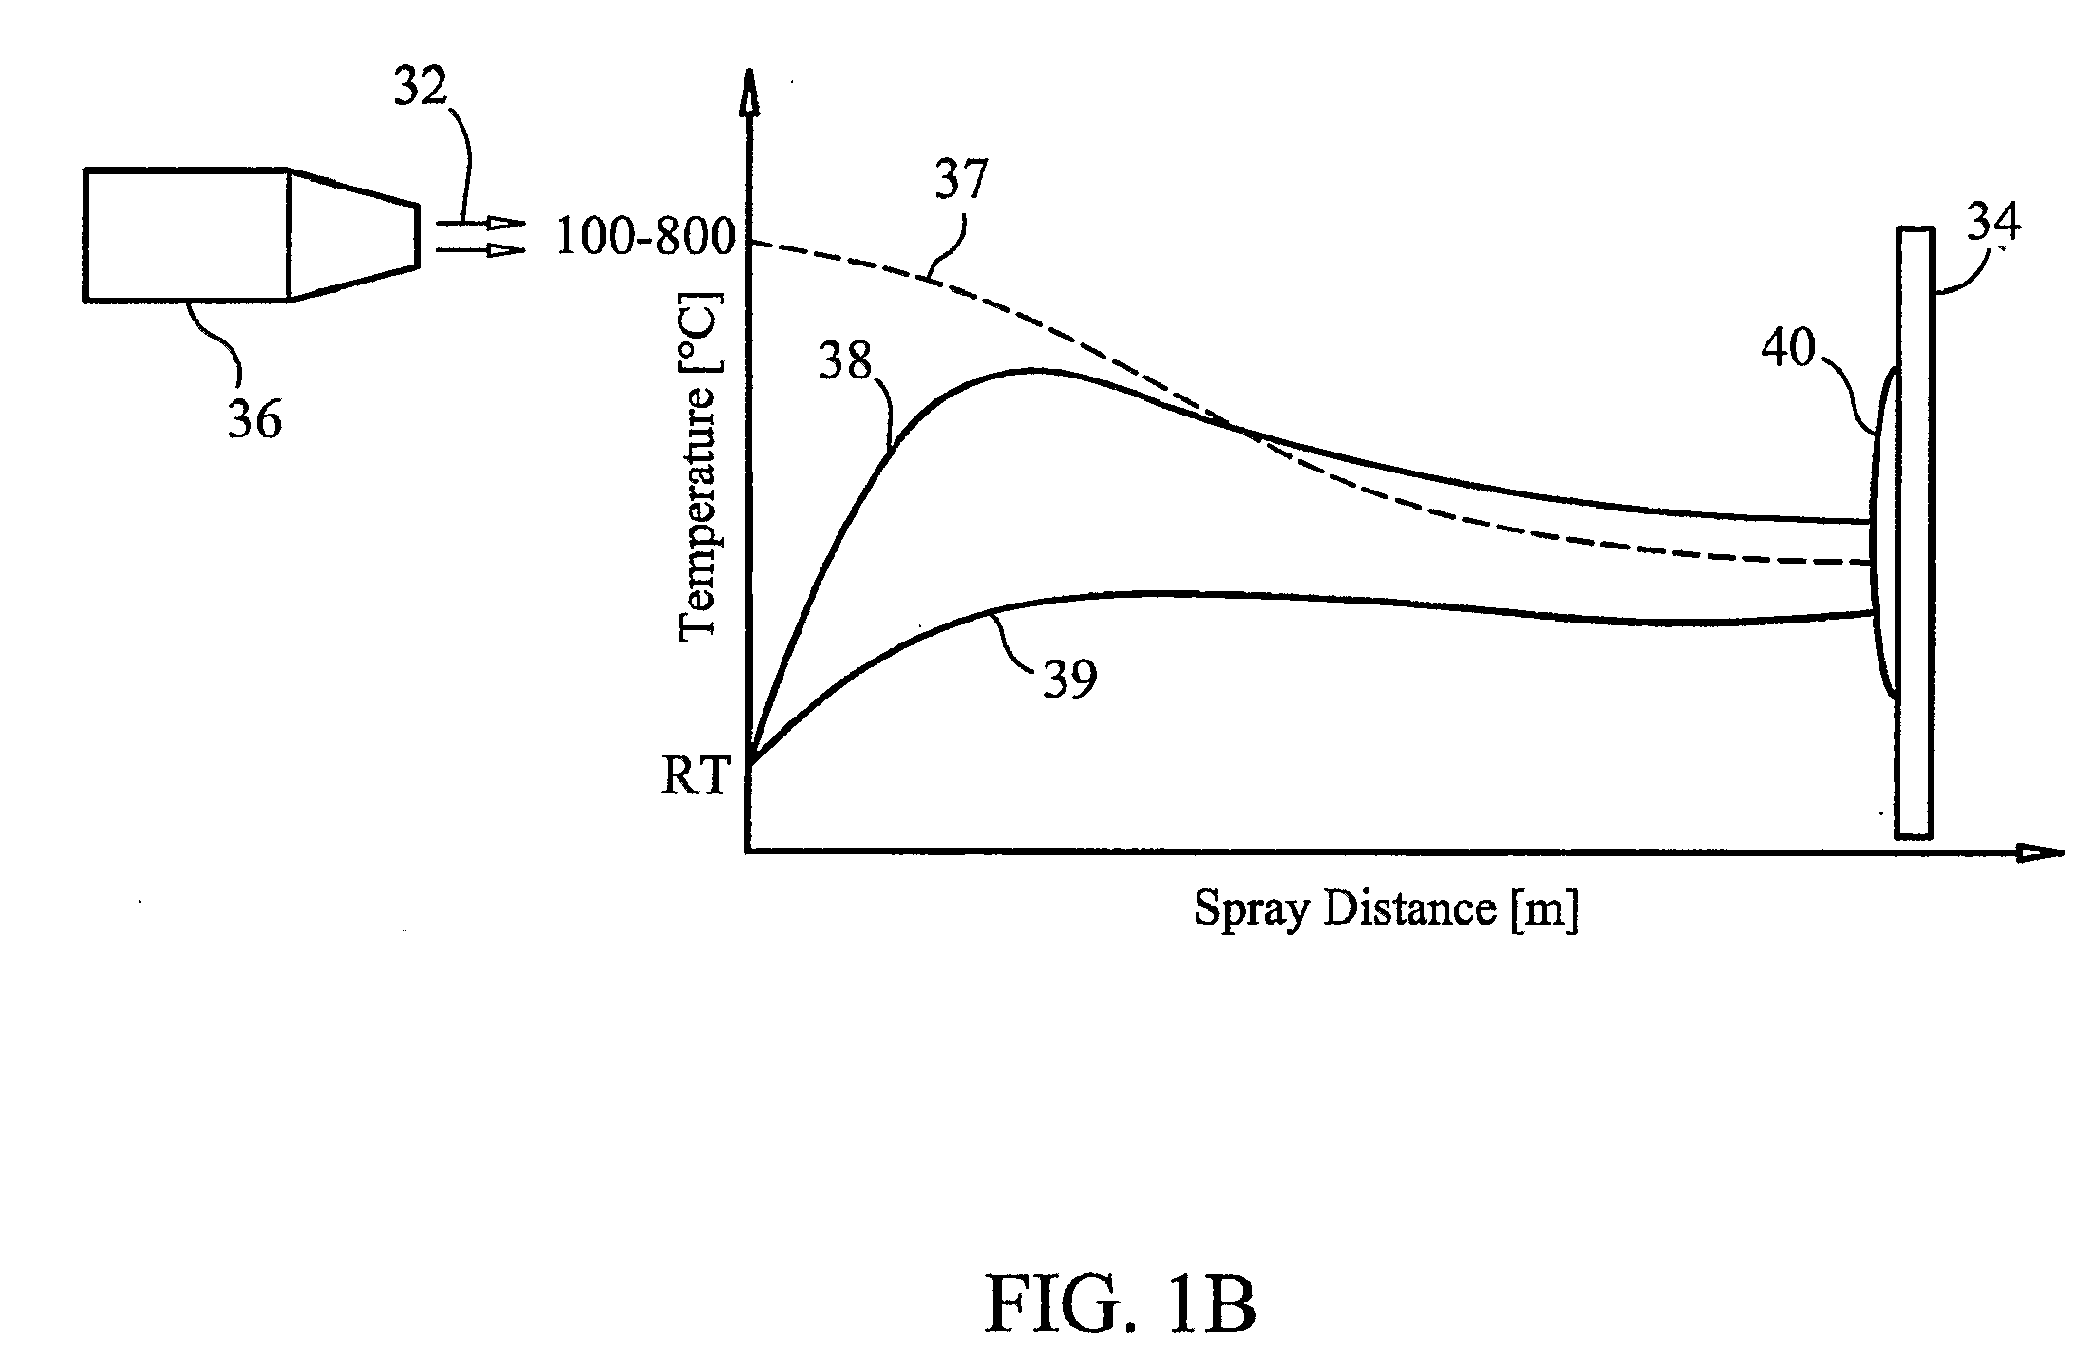 Thermal spray formation of polymer coatings